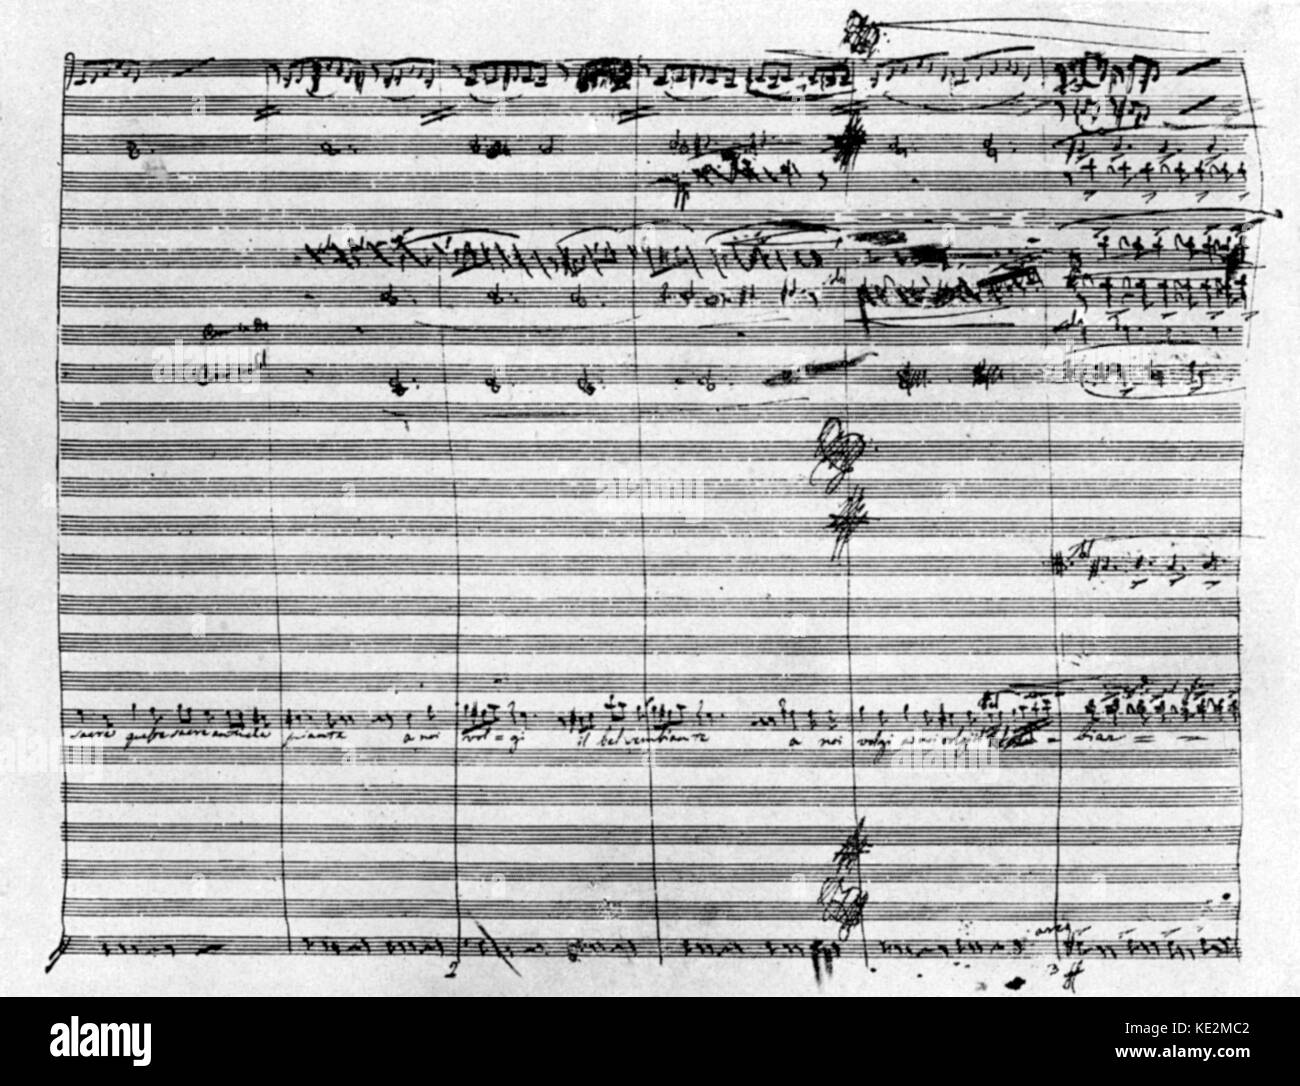 Vincenzo Bellini 's opera Norma - second page of the aria 'Casta diva…' in Italian composer 's handwriting, 3 November 1801 - 23 September 1835 Stock Photo - Alamy